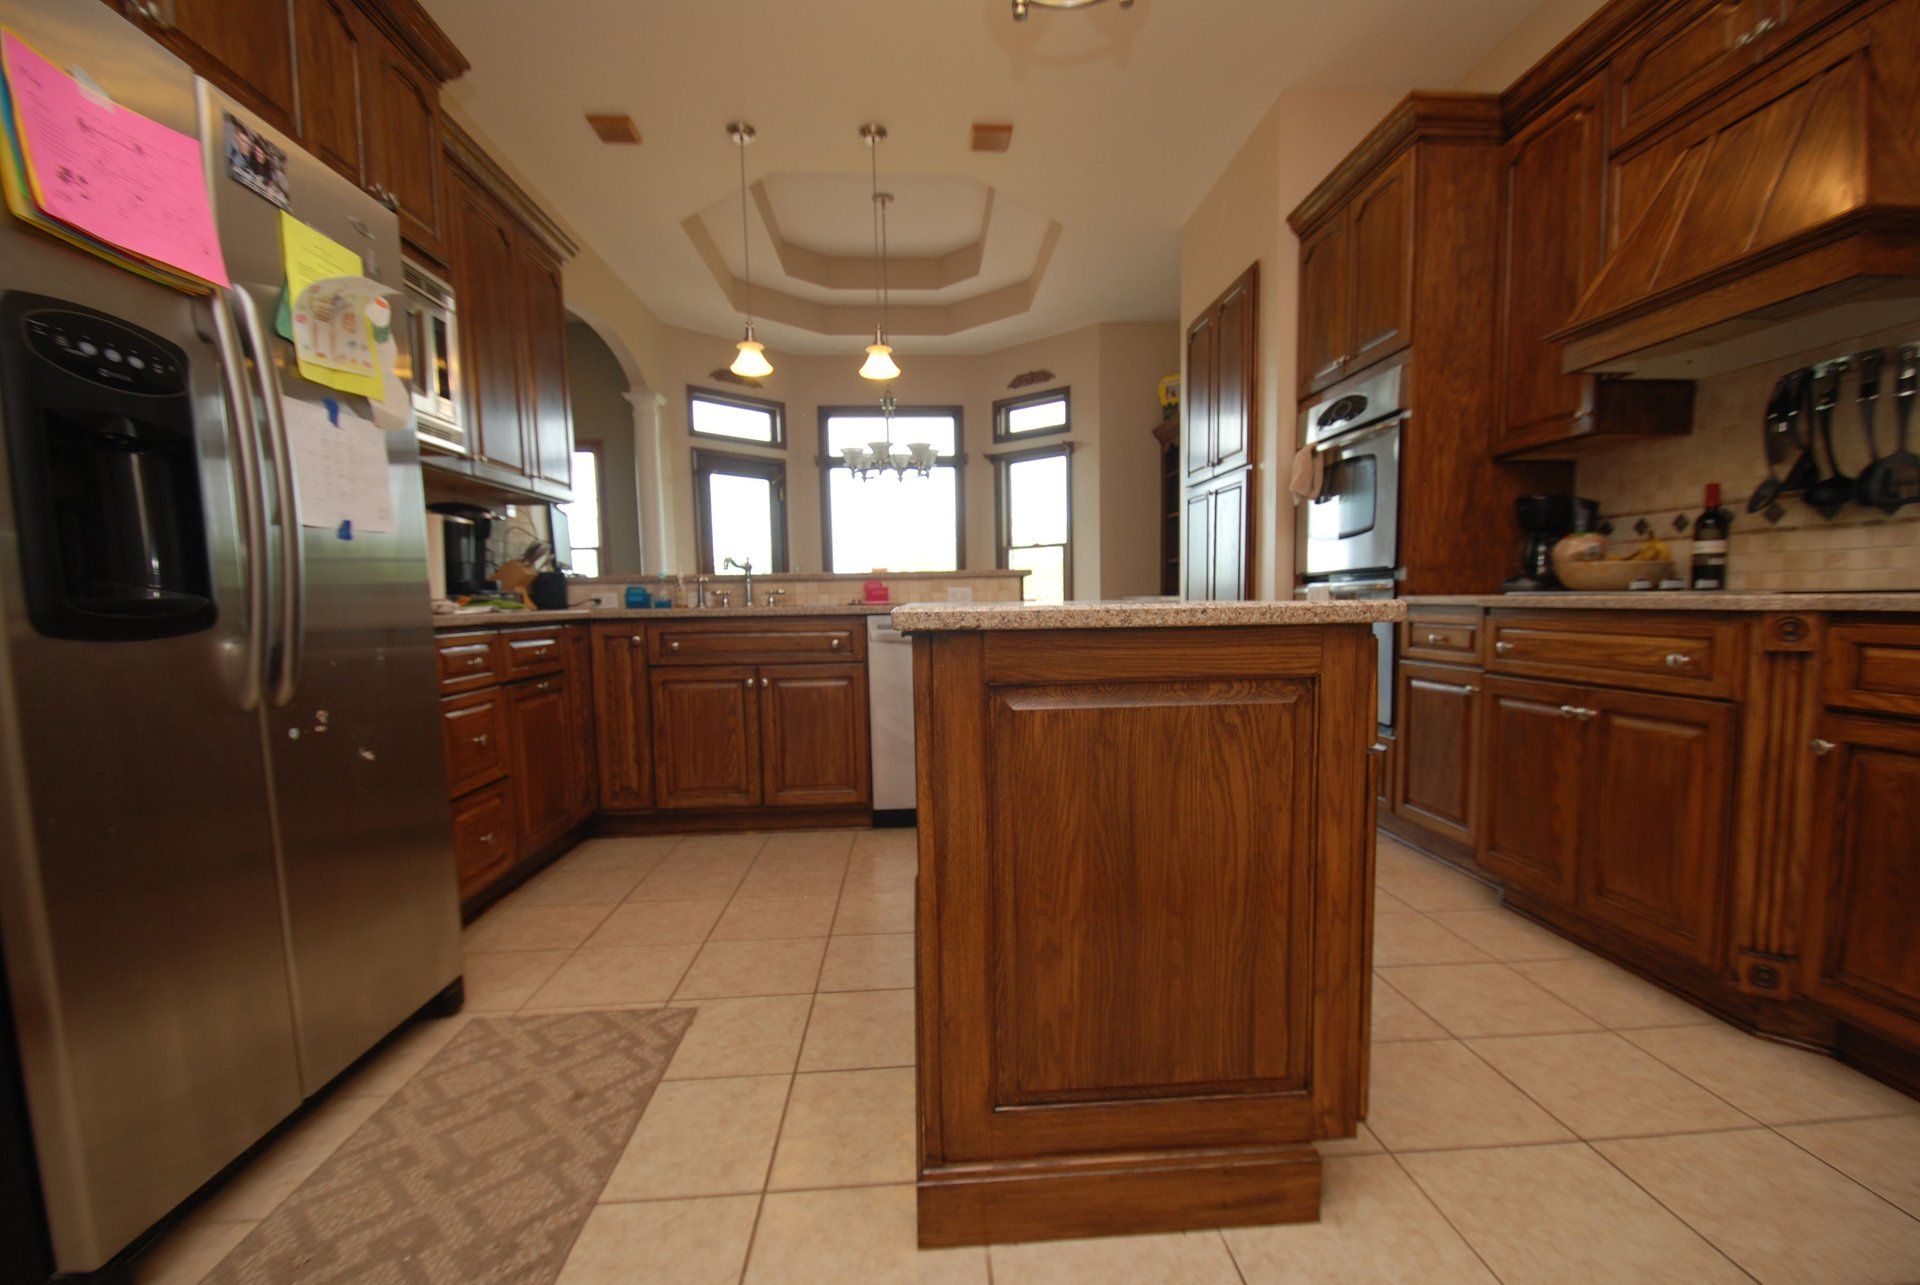 Valencia walnut stained cabinets